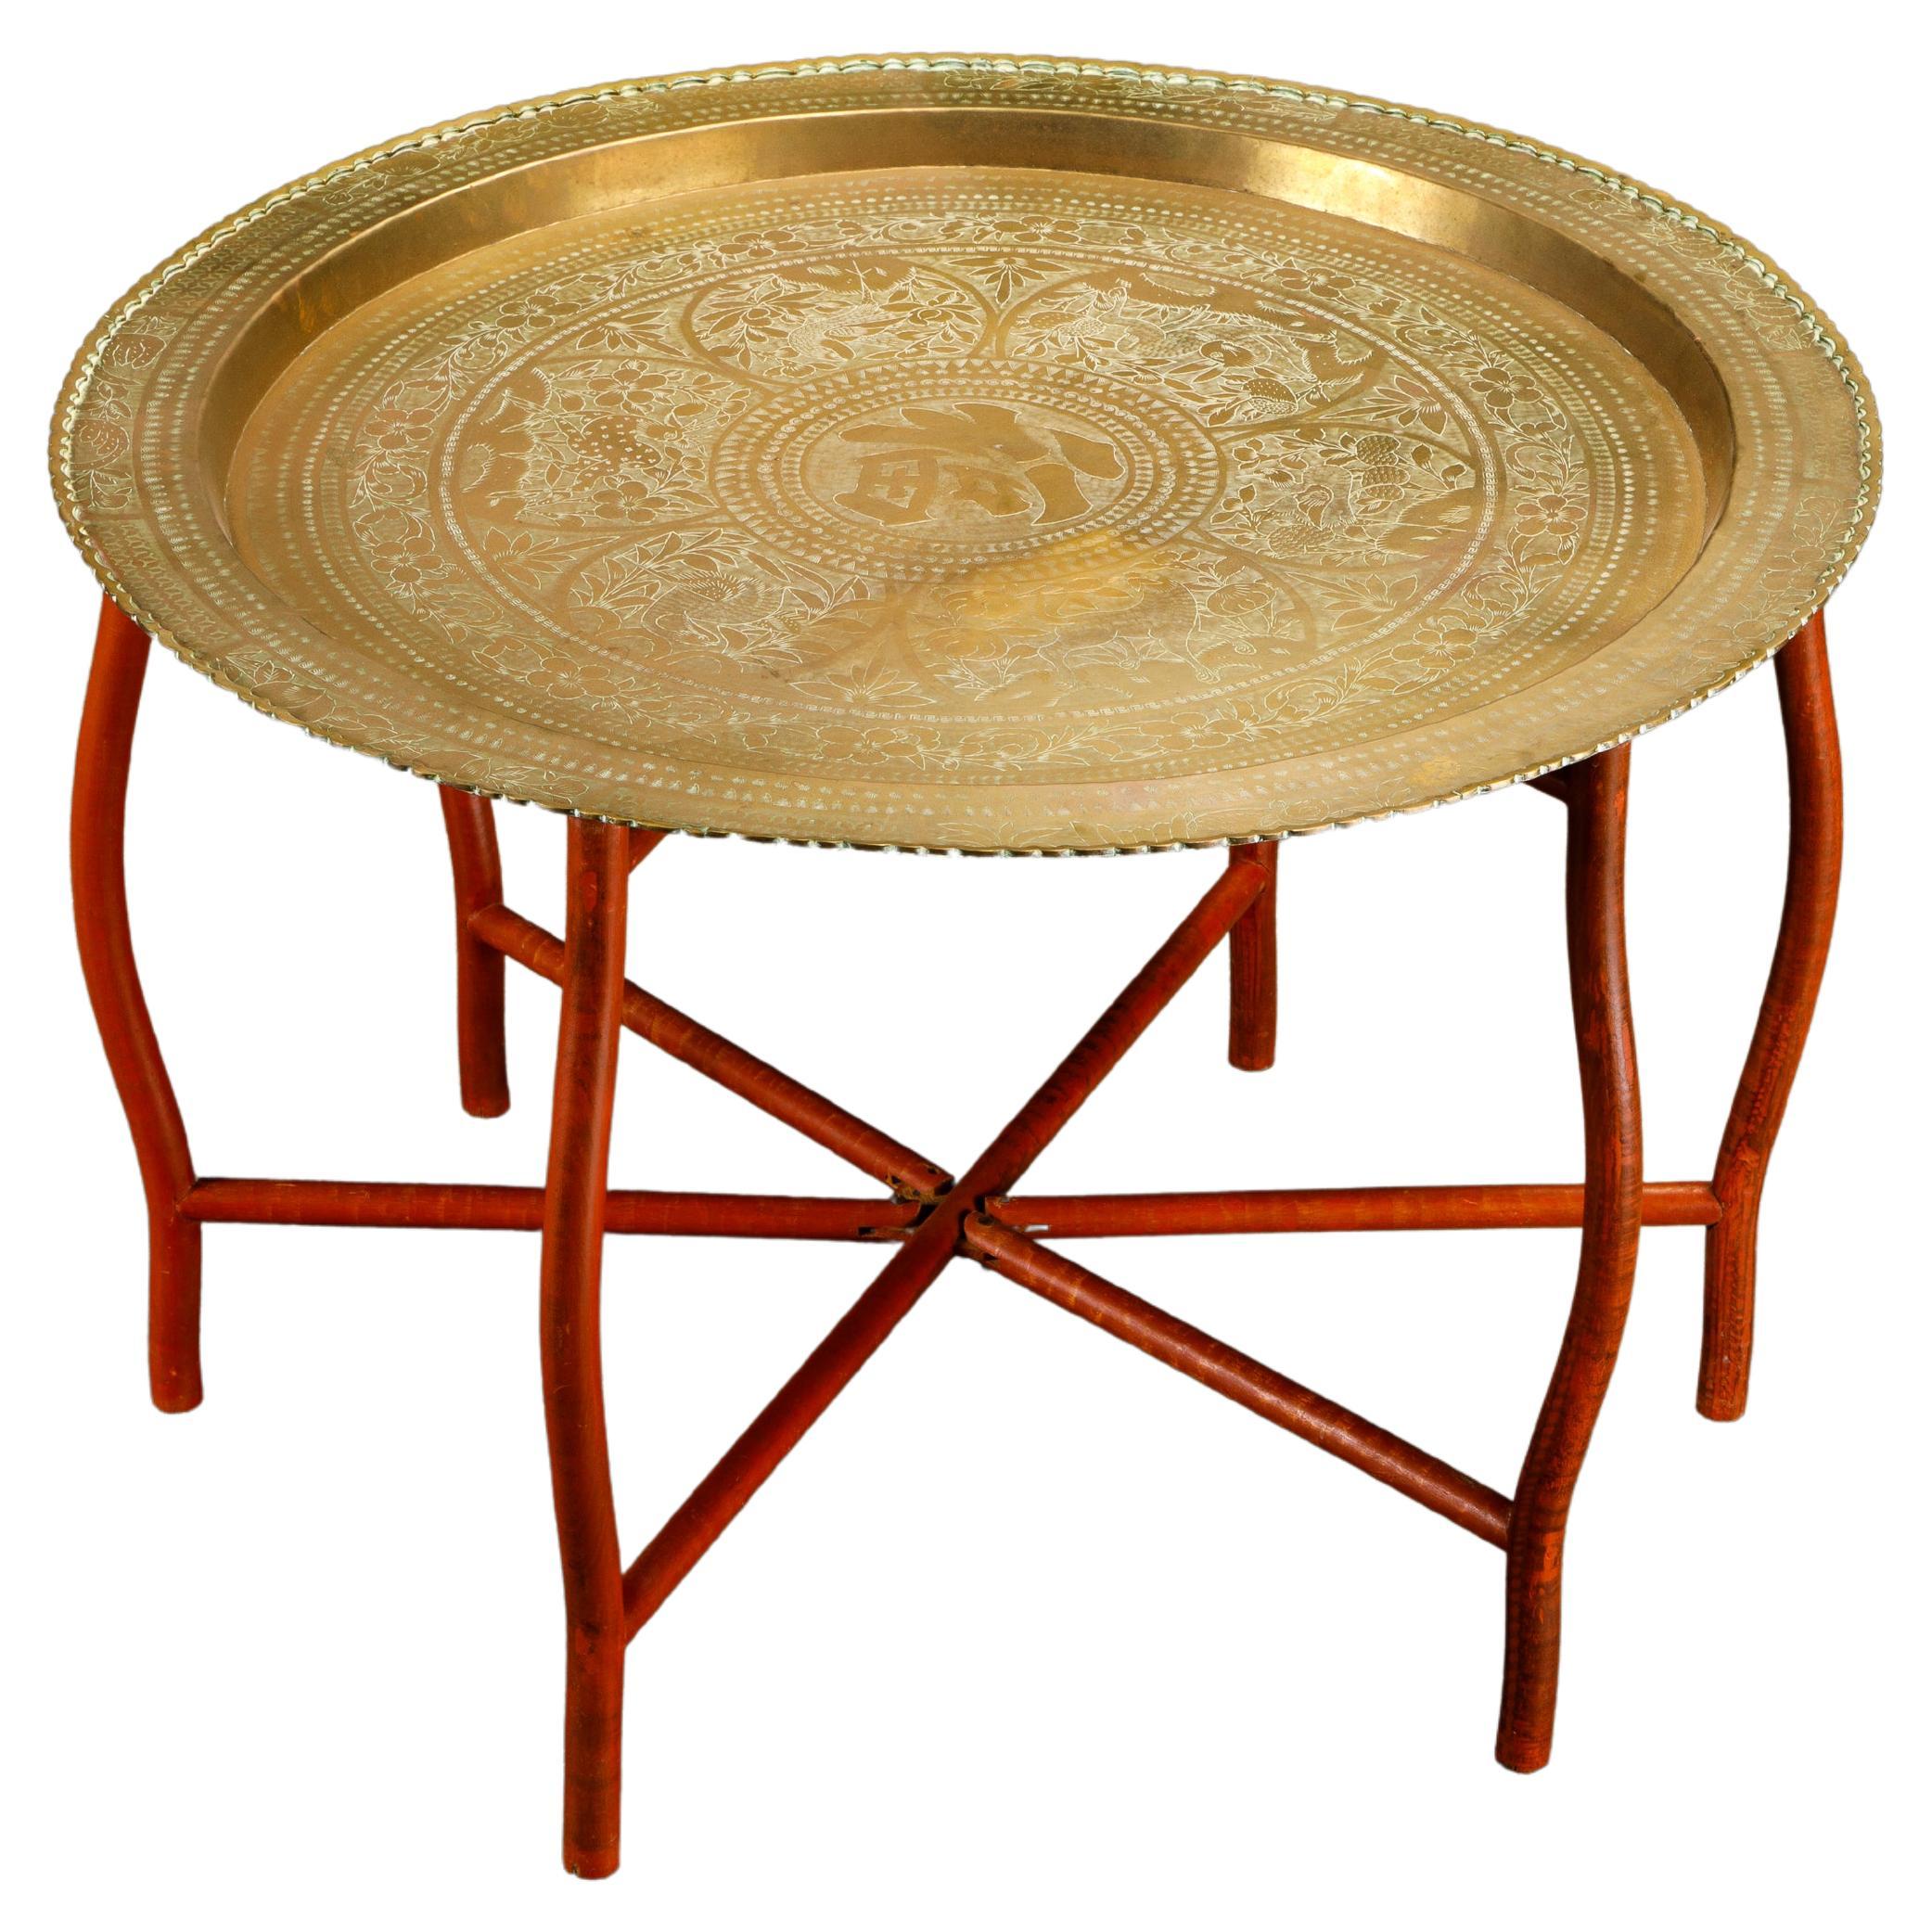 Asian Engraved and Hammered Brass Tray Table with Foldable Wood Base, c 1960s